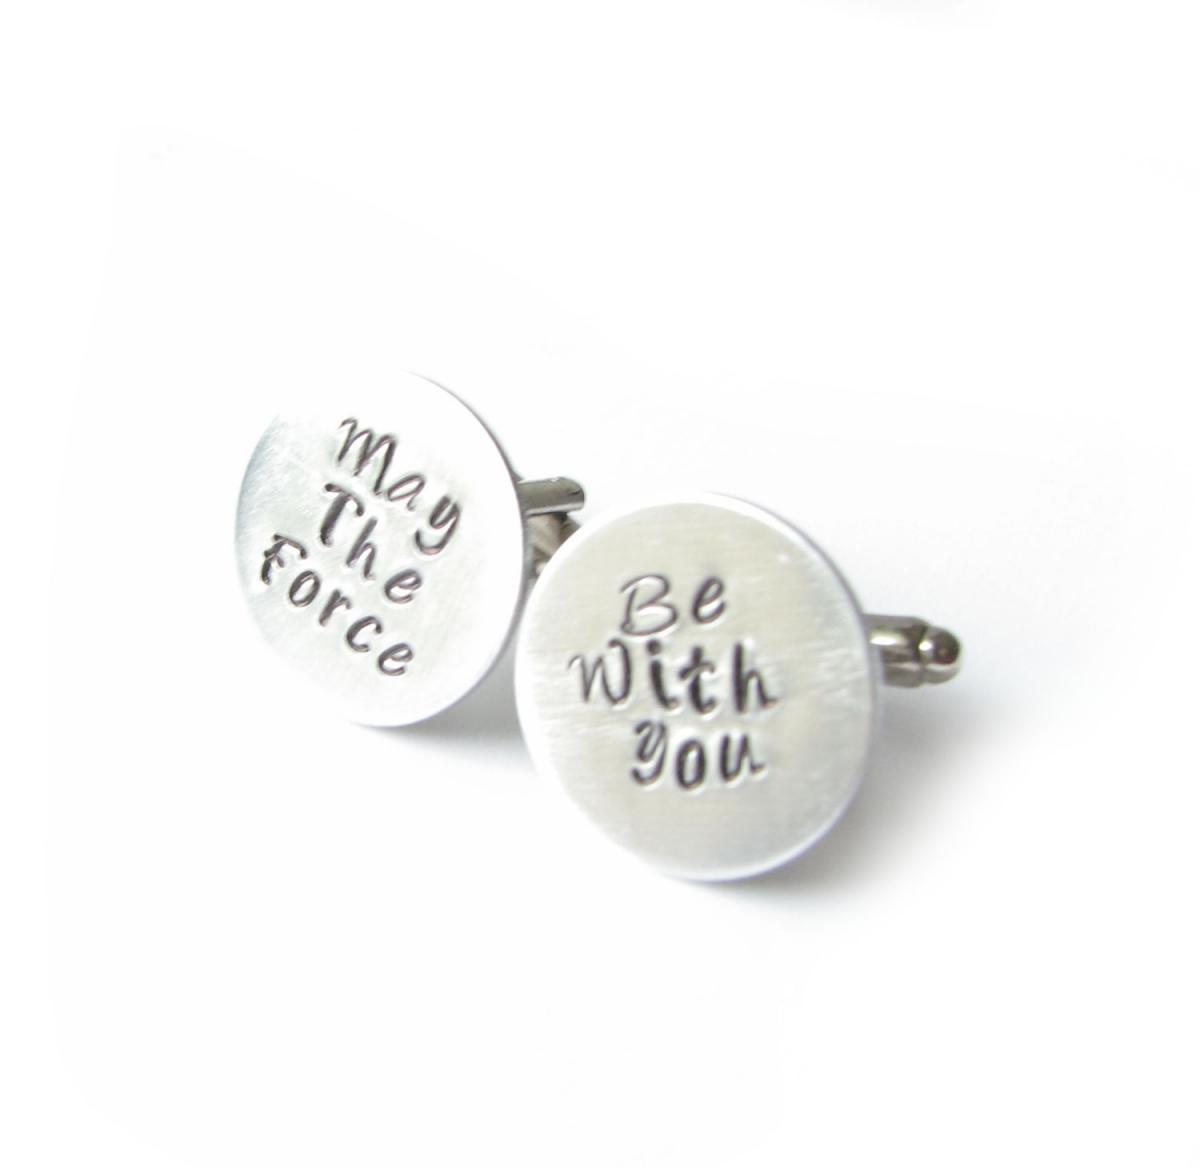 Star Wars Cufflinks May The Force Be With You Gift For Him Guys Men Father Cuff Links Birthday Wedding